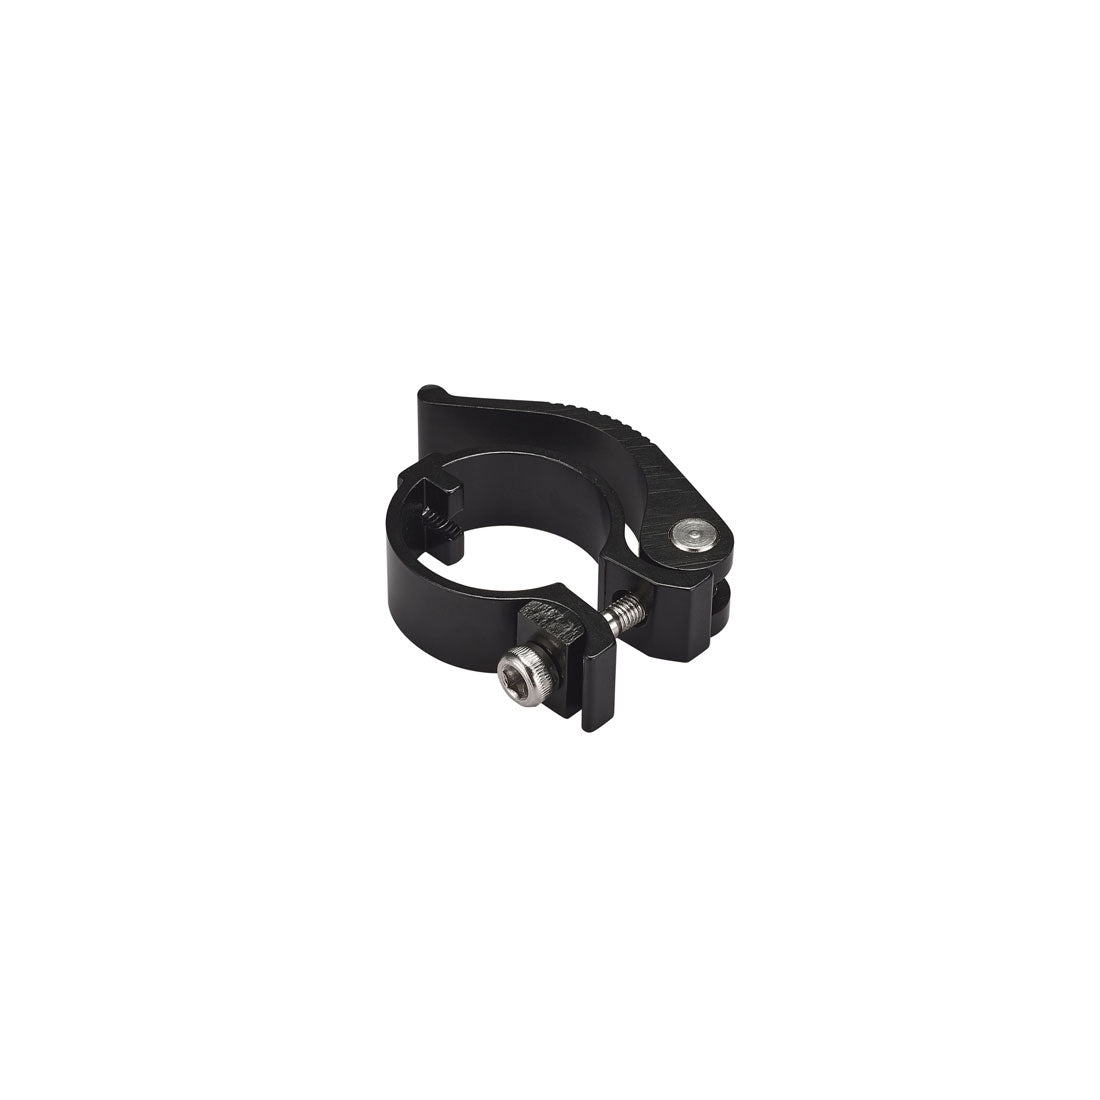 Micro Downtown Height Adjust Clamp - 6712 Scooter Hardware and Parts